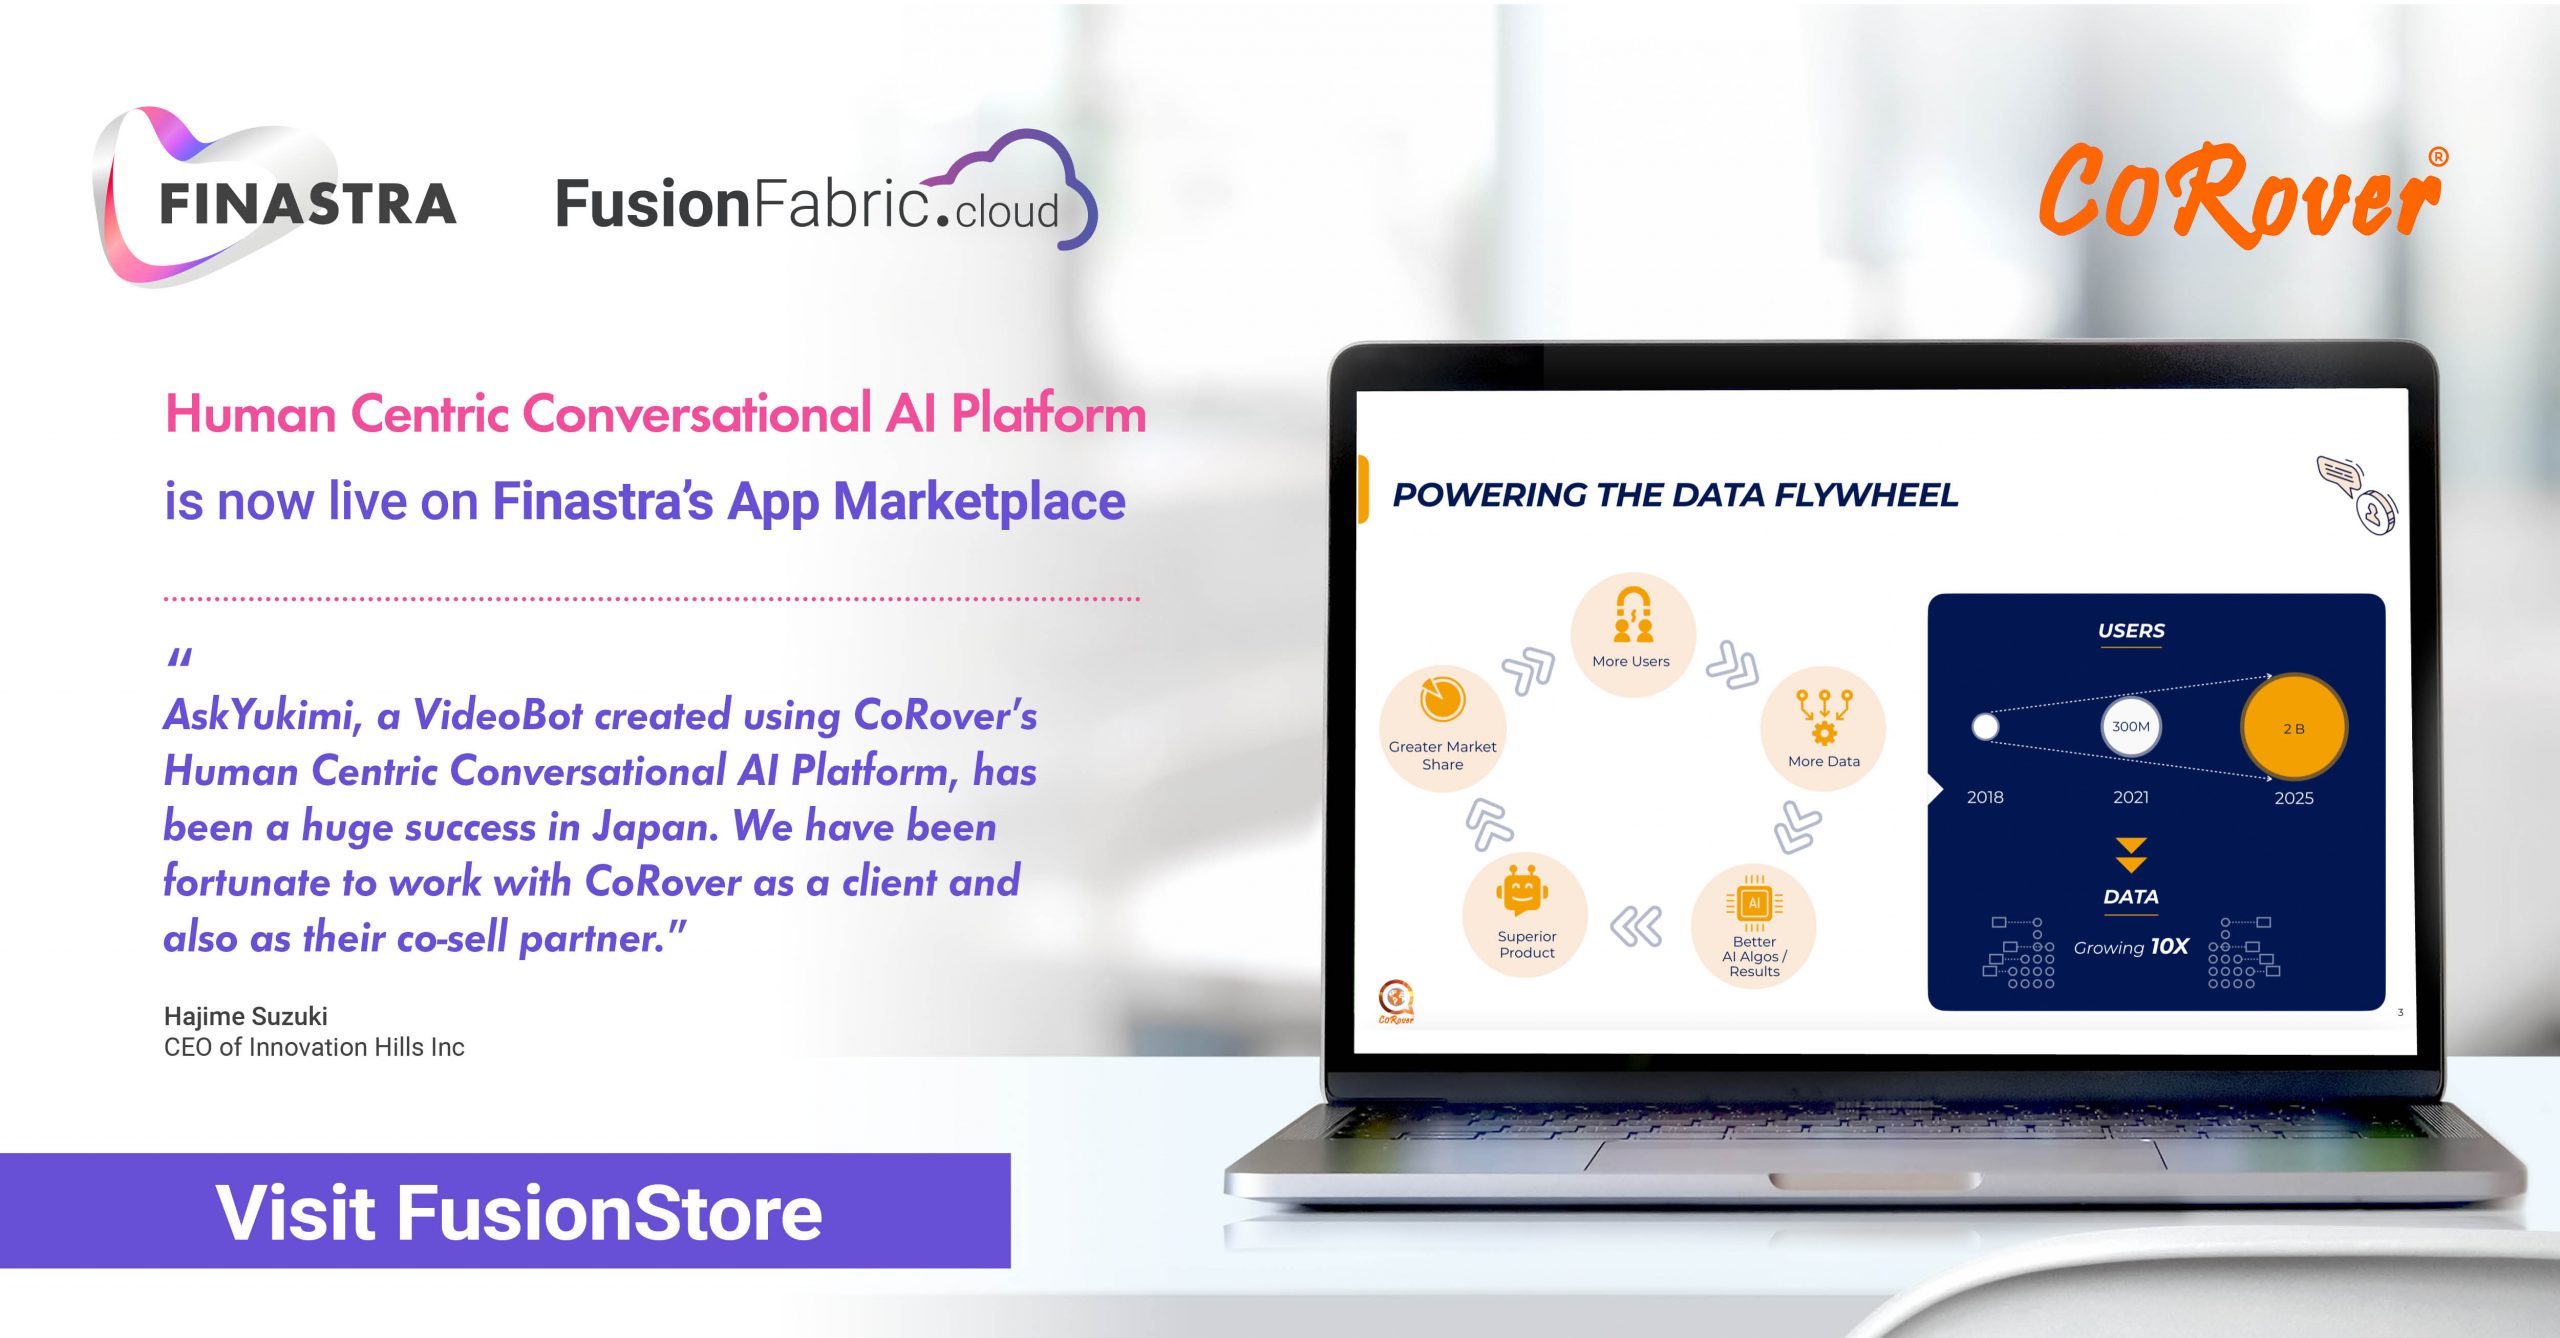 CoRover launches Human Centric Conversational AI Platform app on Finastra’s FusionFabric.cloud